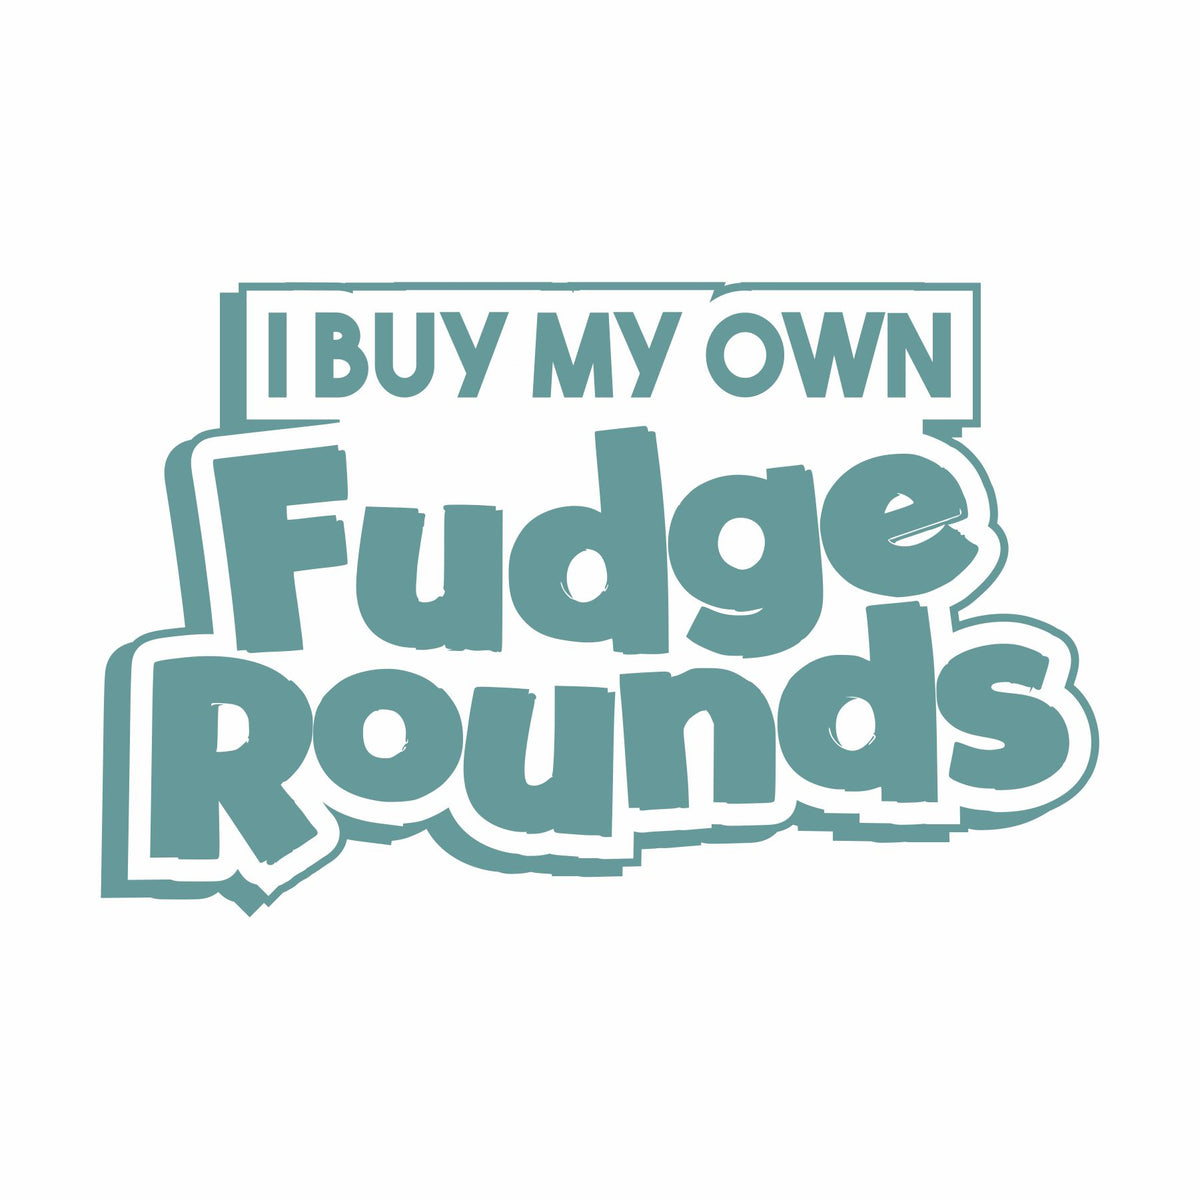 I Buy My Own Fudge Rounds - Vinyl Decal - Free Shipping